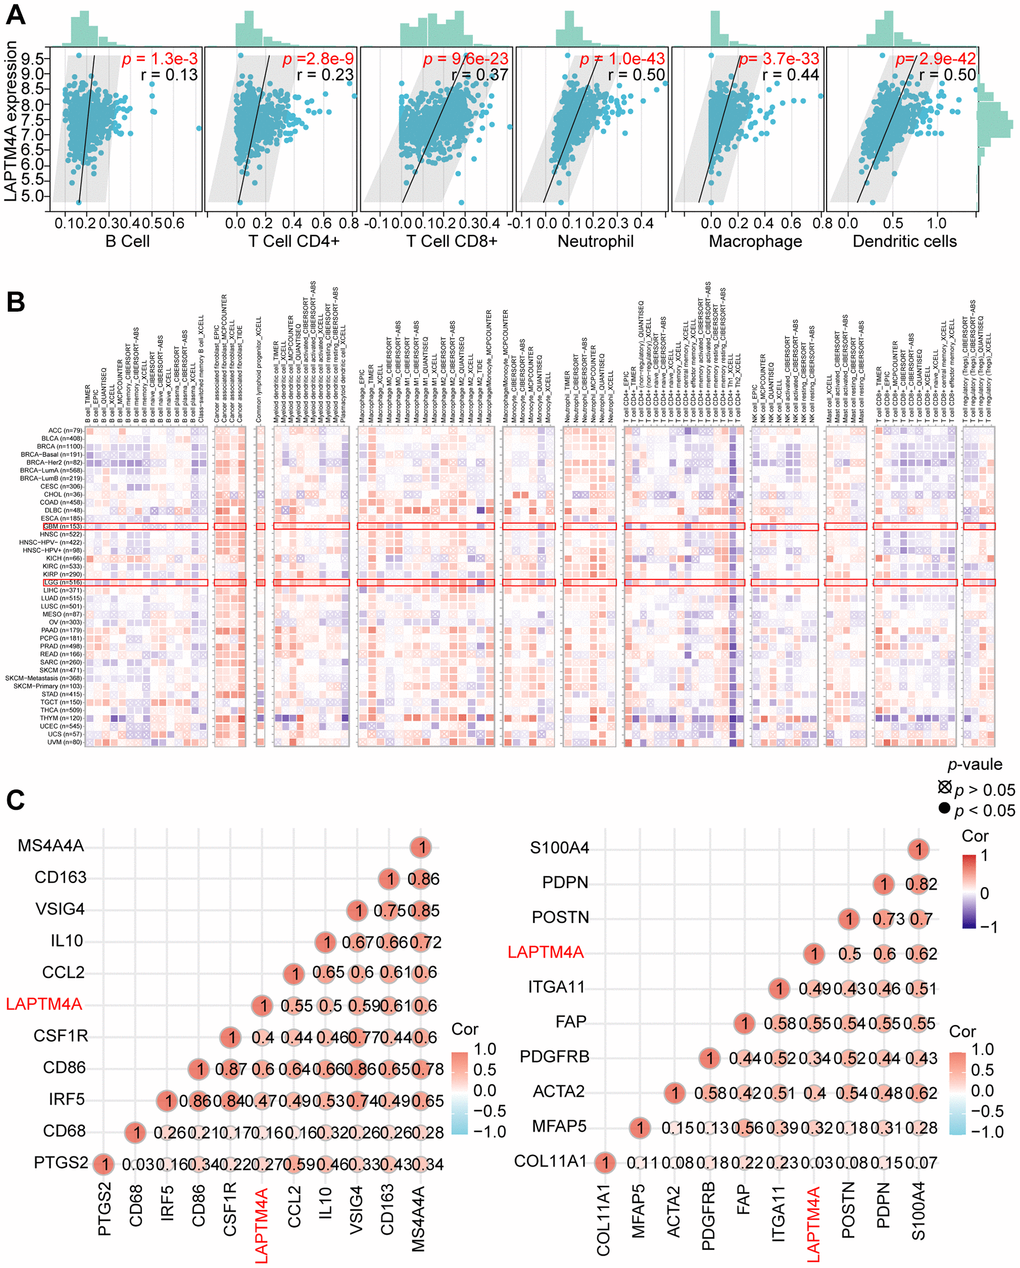 Analysis of the correlation between LAPTM4A expression and immune cell infiltration. (A) The relevance between LAPTM4A expression and the infiltration of five immune cells. (B) The association between LAPTM4A expression and the infiltration of various immune cells in pan-cancers. (C) The connection between LAPTM4A expression and several notable biomarkers of Macrophage/Monocyte and cancer-associated fibroblast.